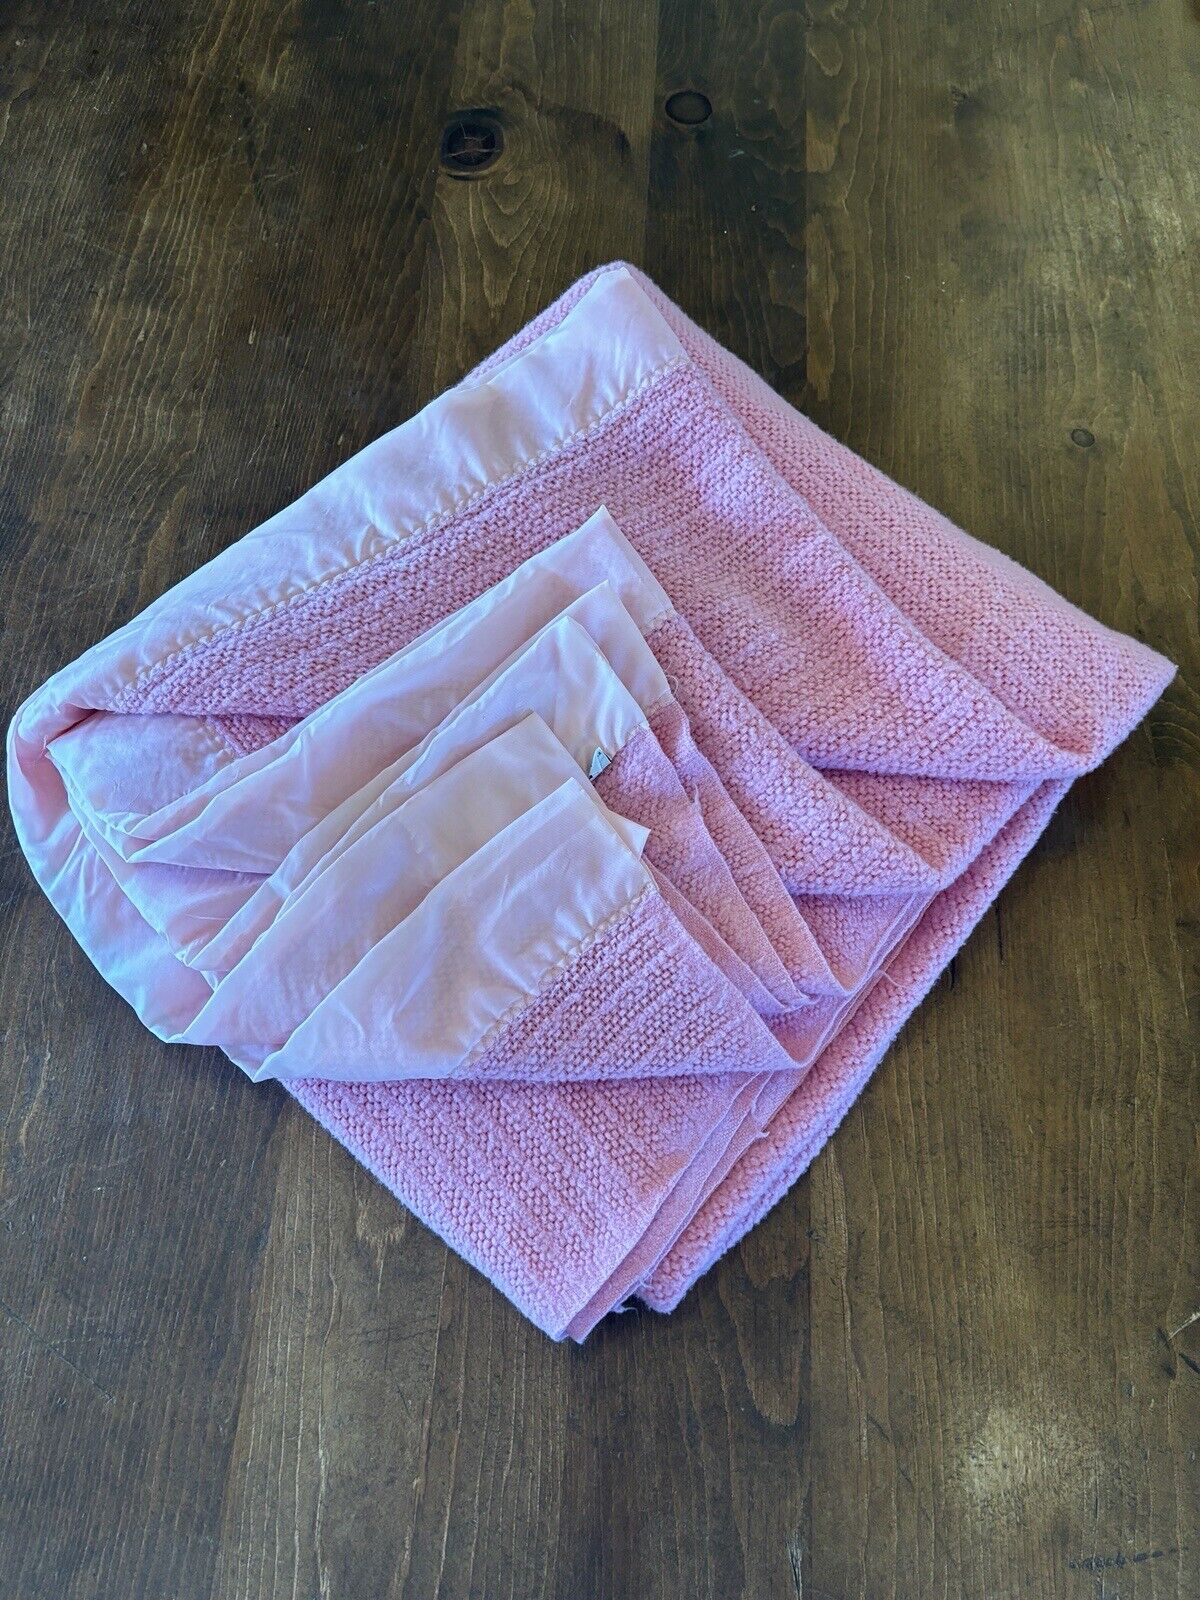 Vintage Satin Edge Blanket Pink 80x70 Very Soft USA Made Classic -2- Thermal